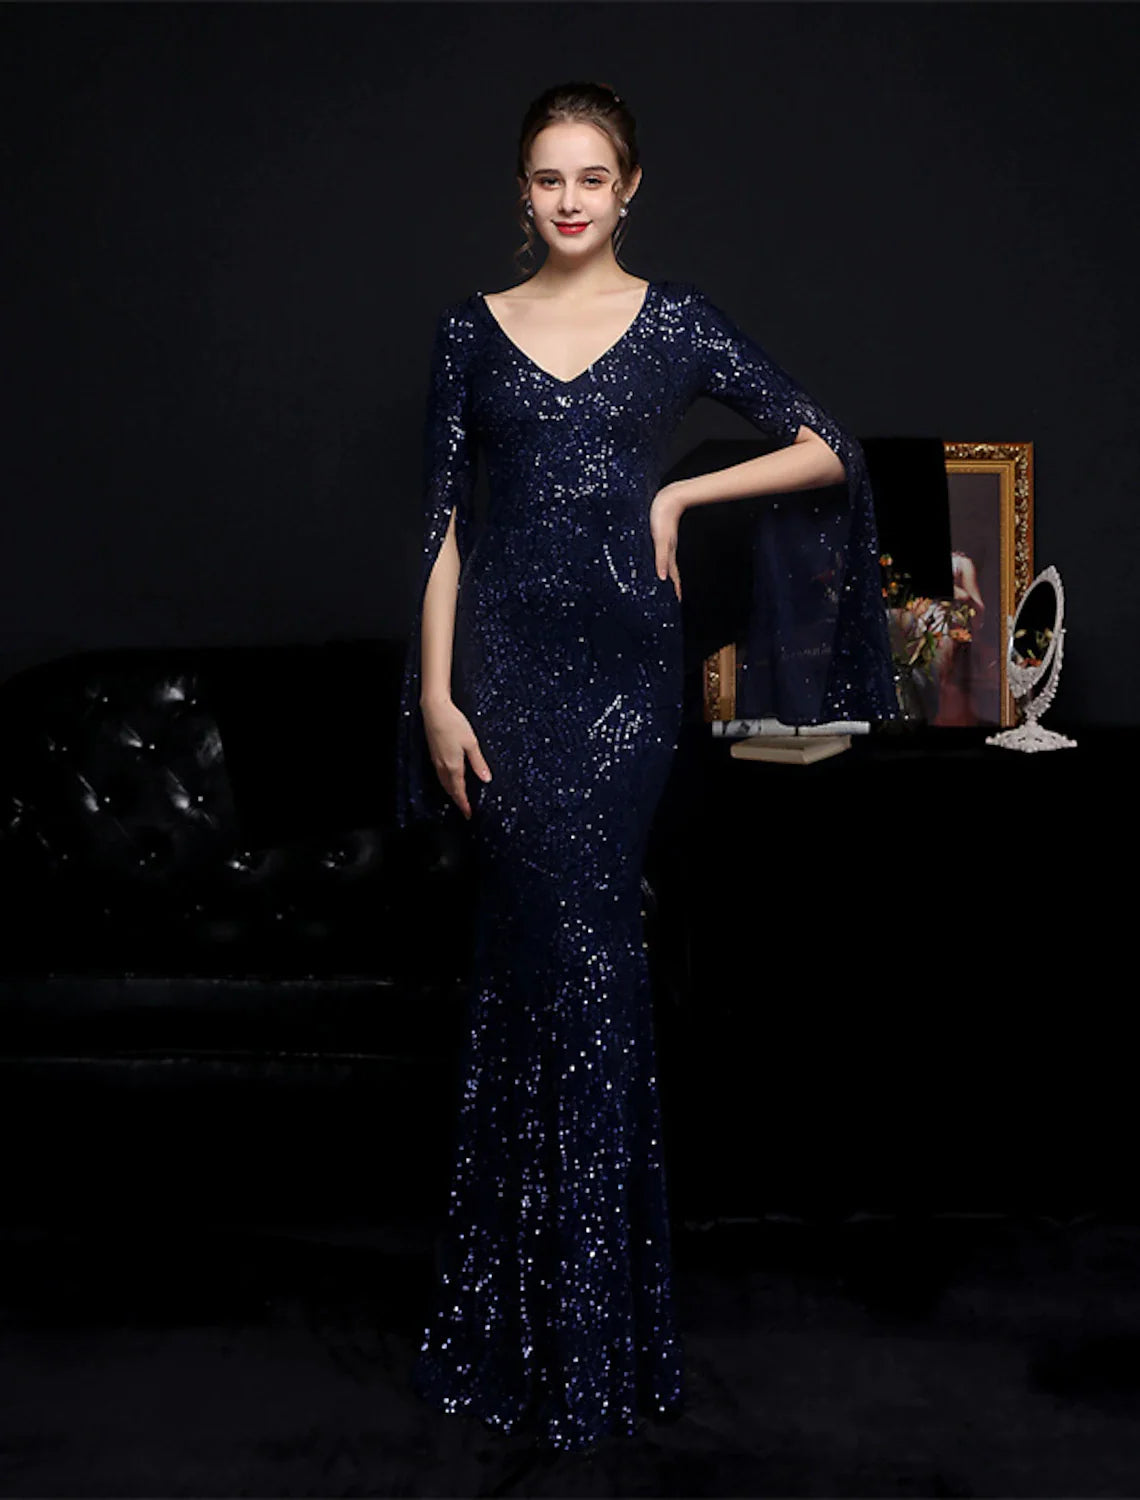 Mermaid / Trumpet Evening Gown Sparkle & Shine Dress Formal Floor Length Long Sleeve V Neck Sequined with Sequin